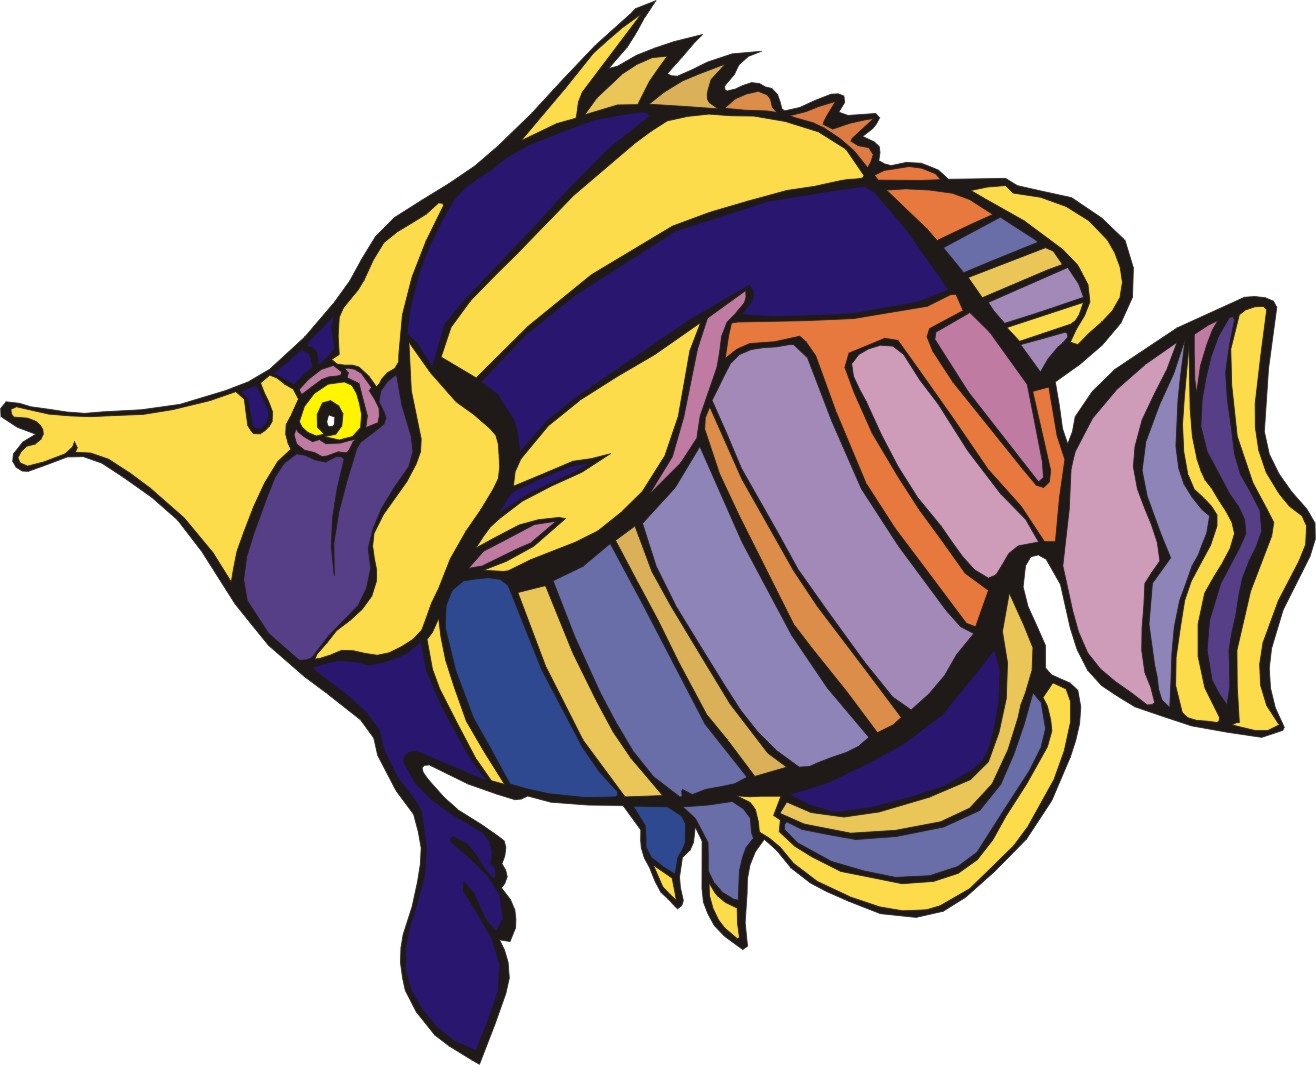 Tropical Fish Drawings - ClipArt Best